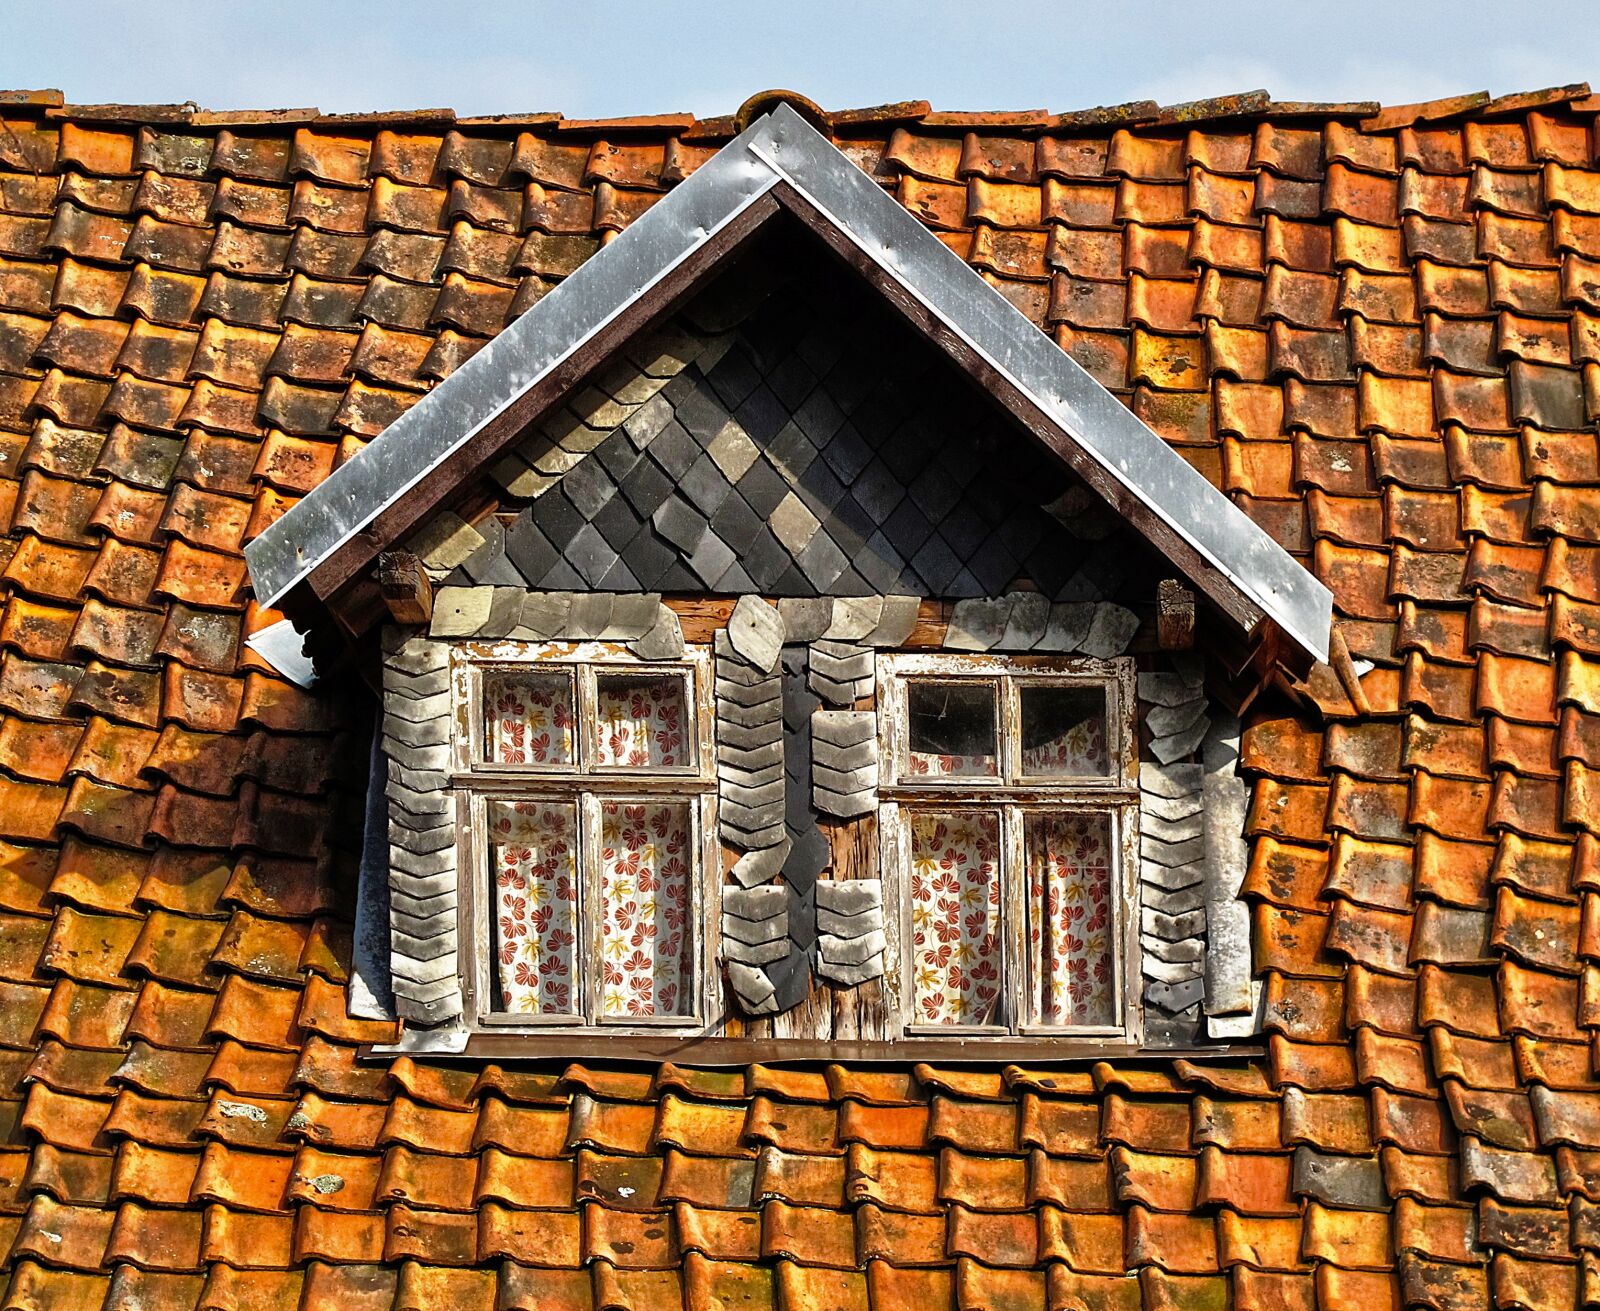 Canon PowerShot G12 sample photo. Roof, tile, wooden windows photography